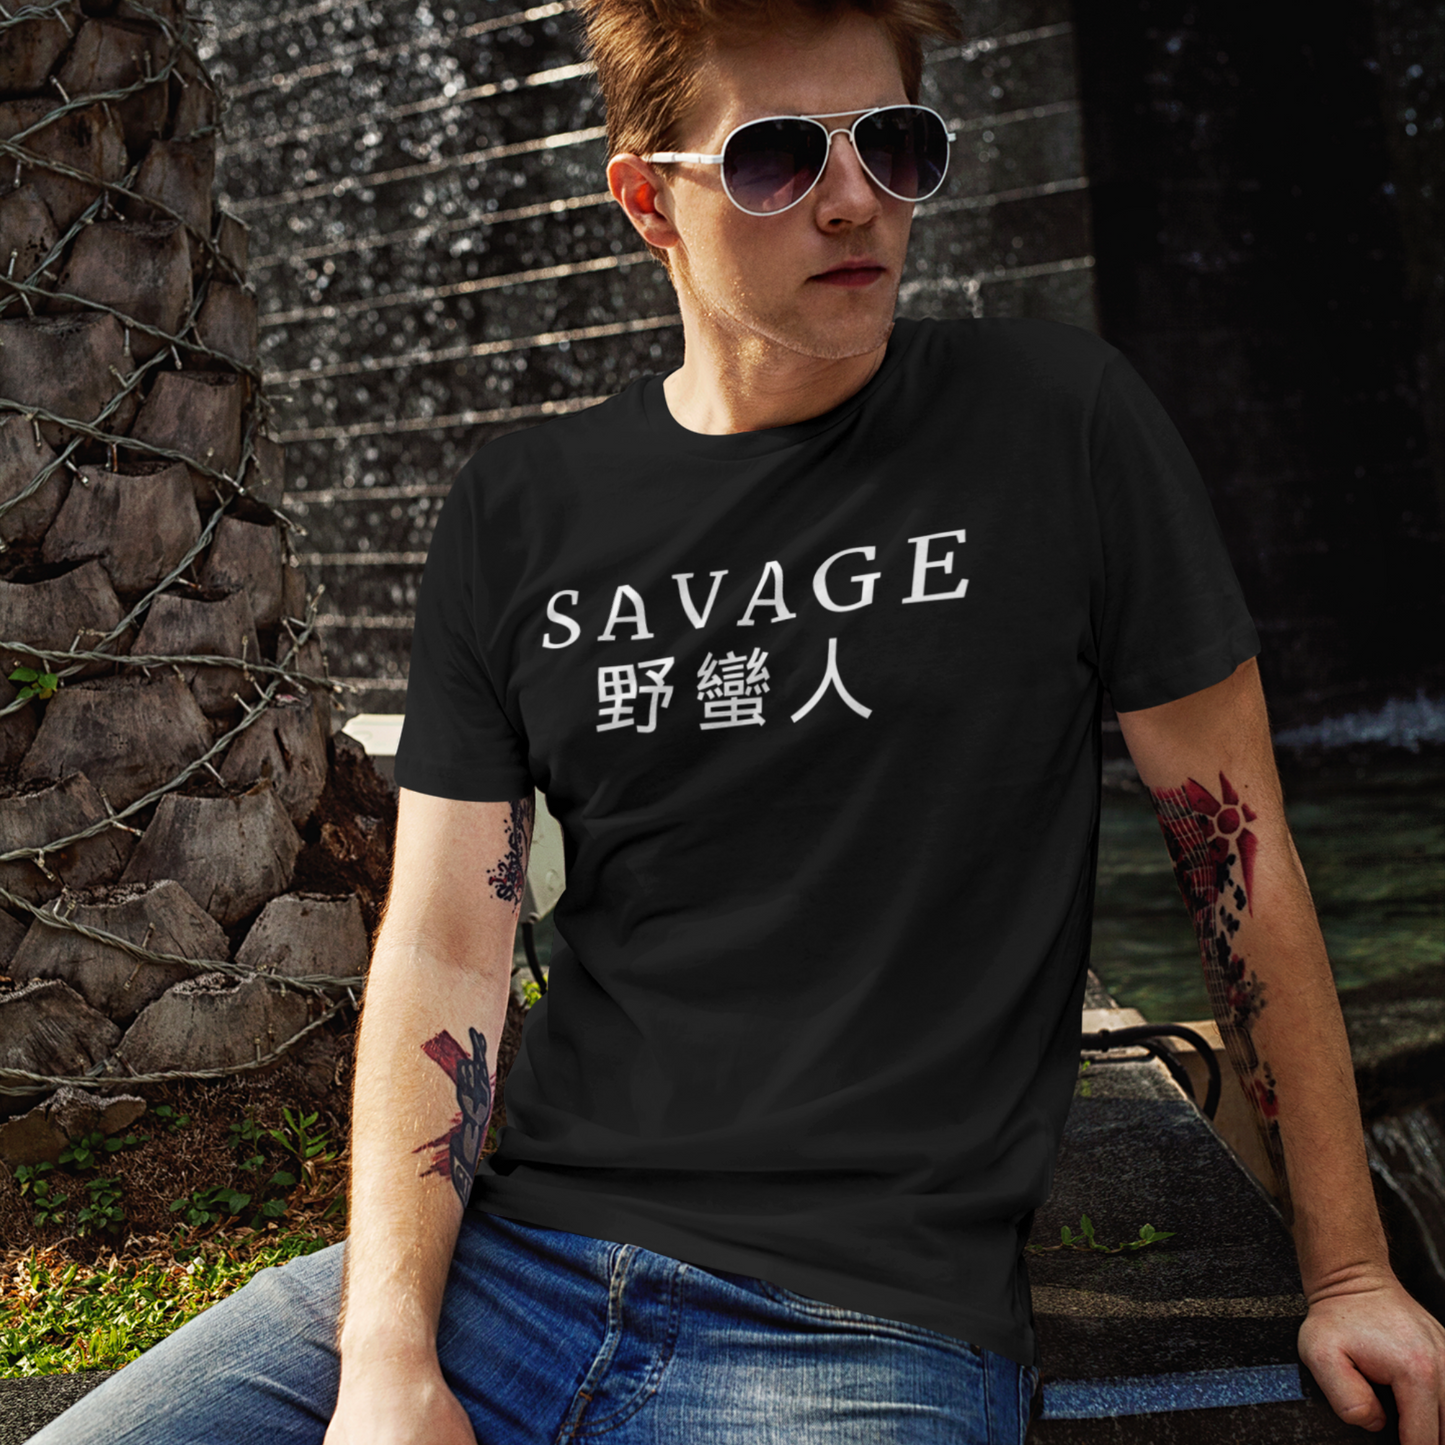 The Absolute Savage | Men's Fitted Tee FL